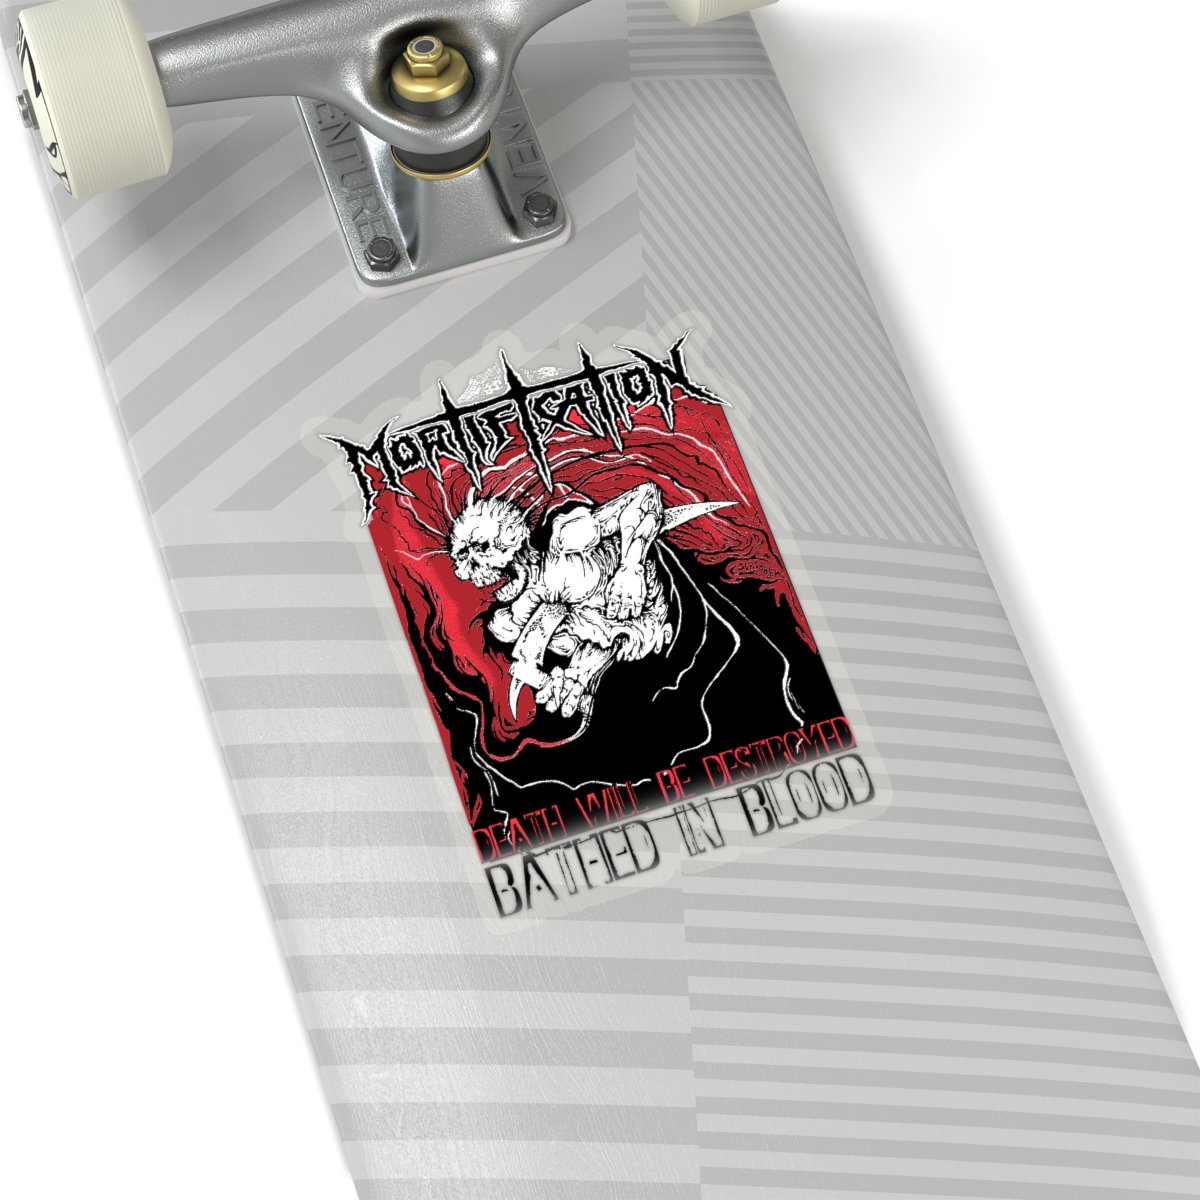 Mortification – Bathed In Blood (Light) Die Cut Stickers